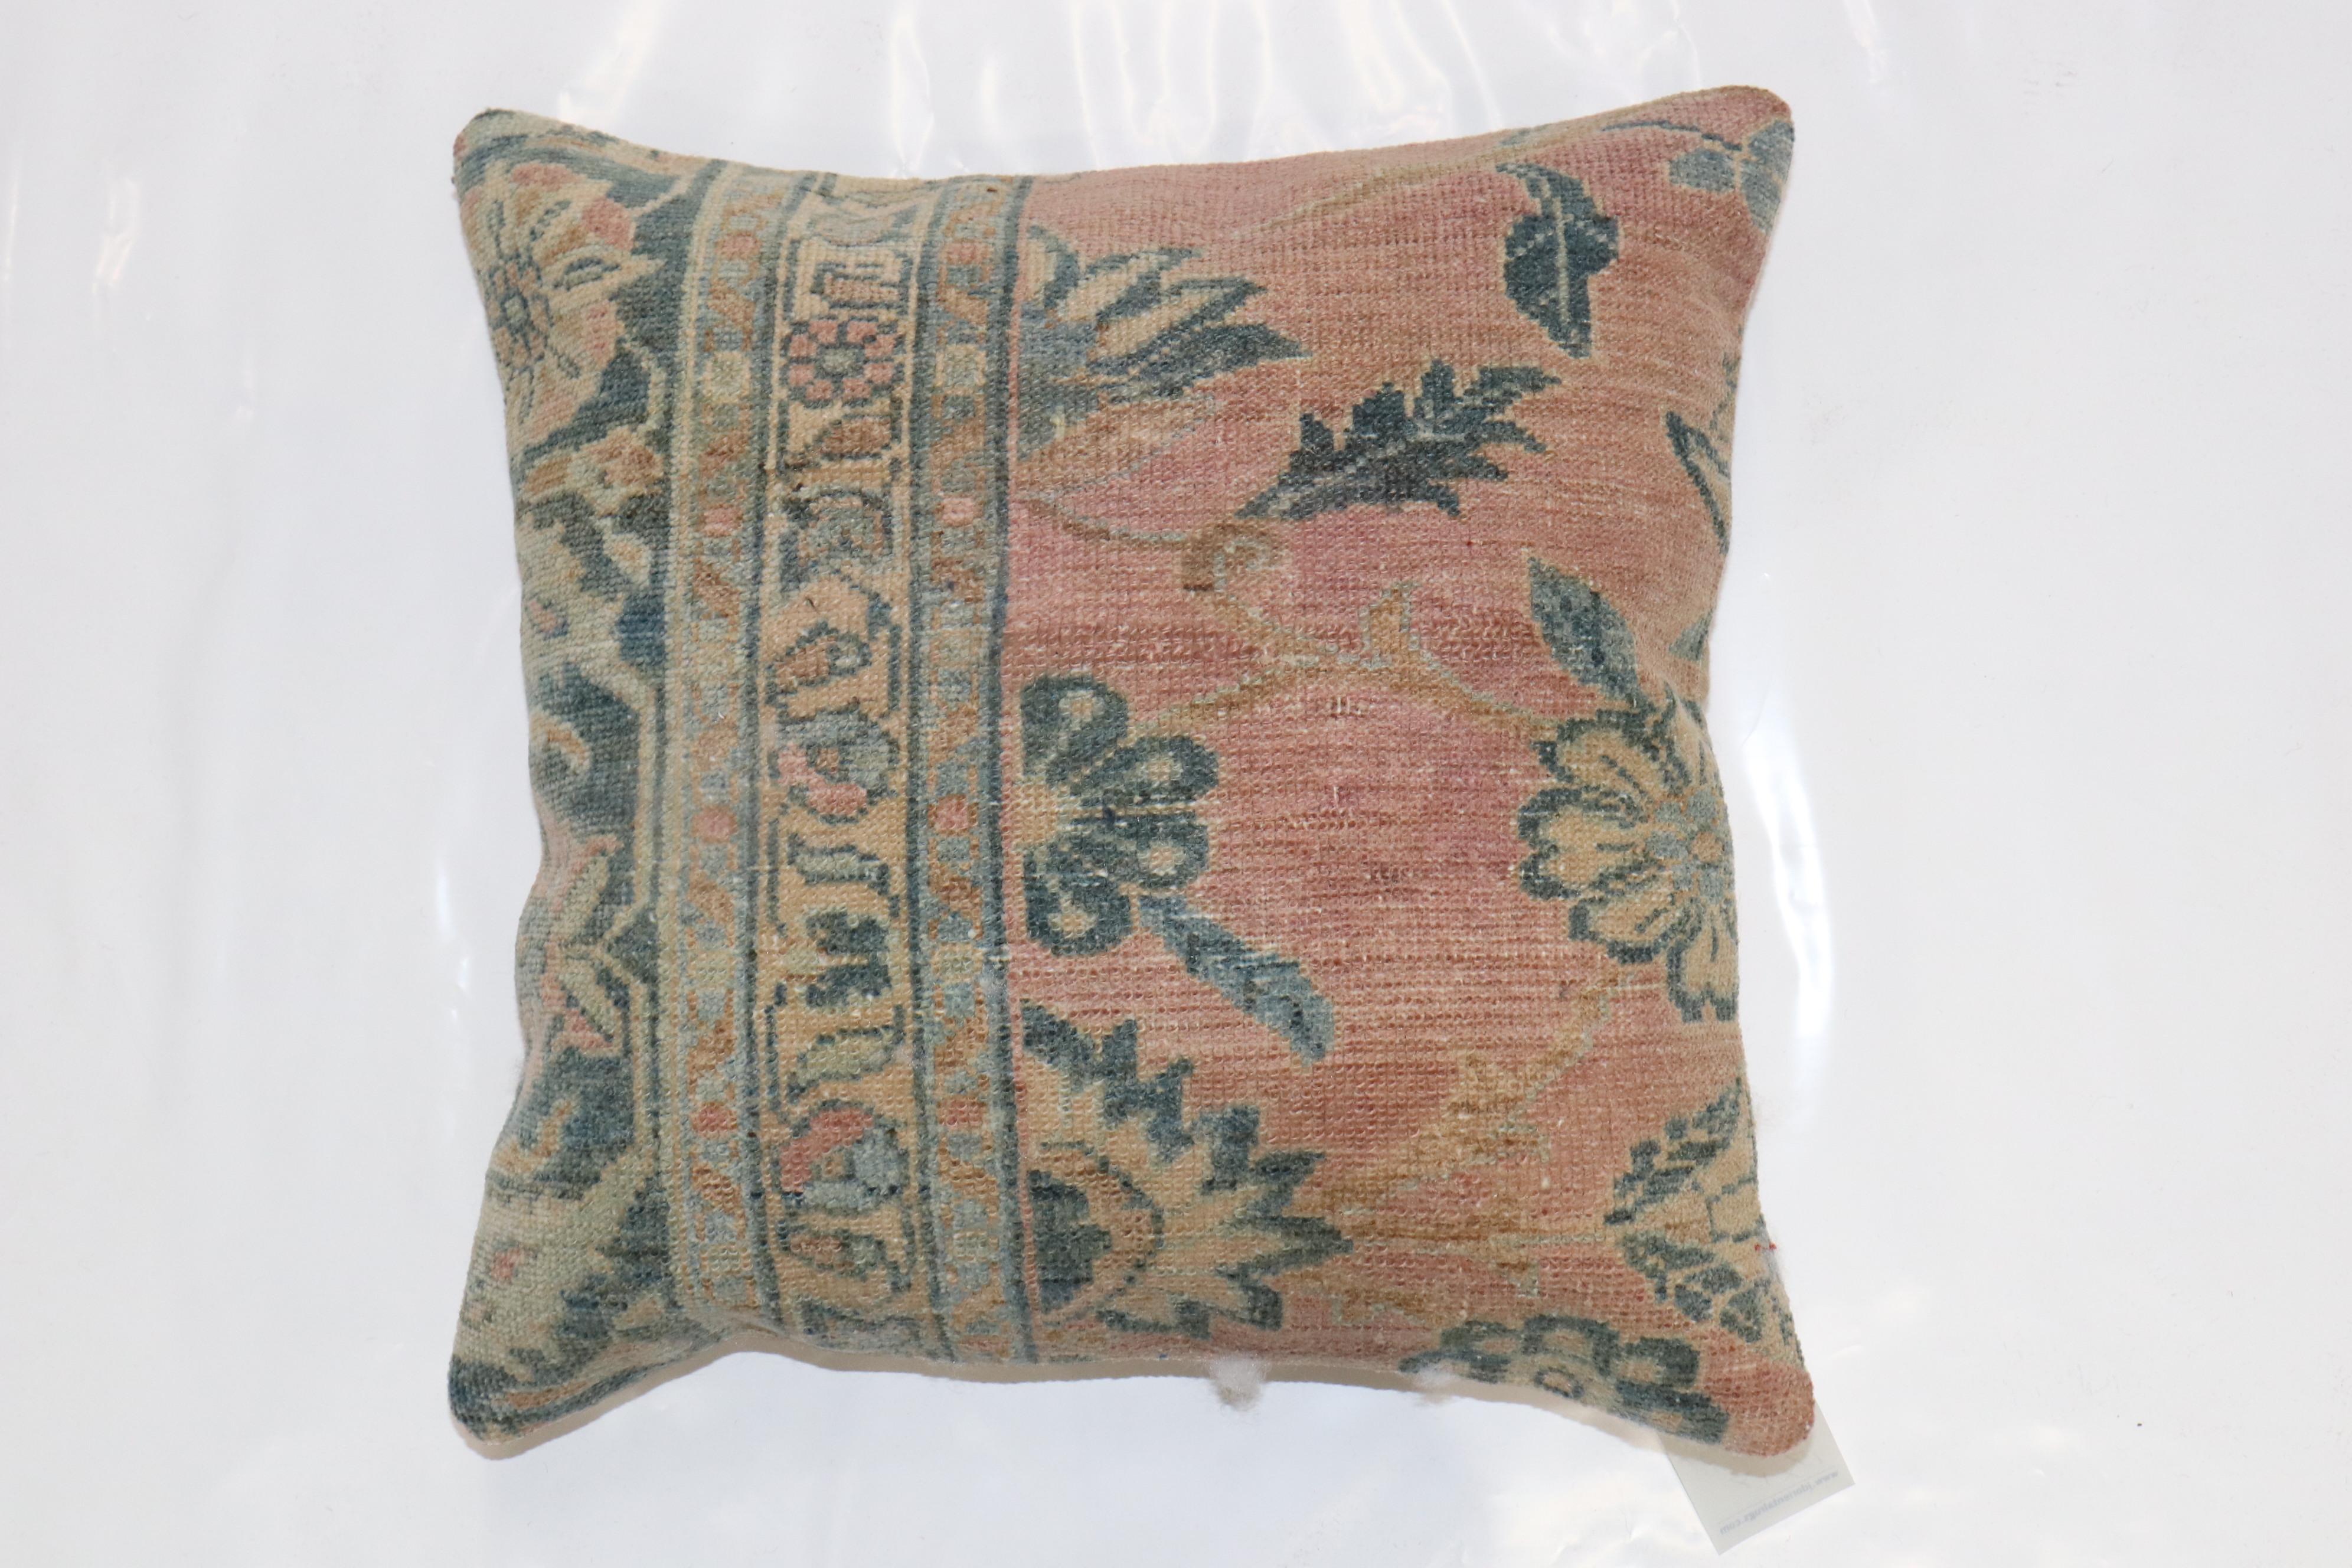 Square size Pillow made from a Persian Lilihan rug. zipper closure and poly-fill insert provided.

Measures: 19'' x 19''.